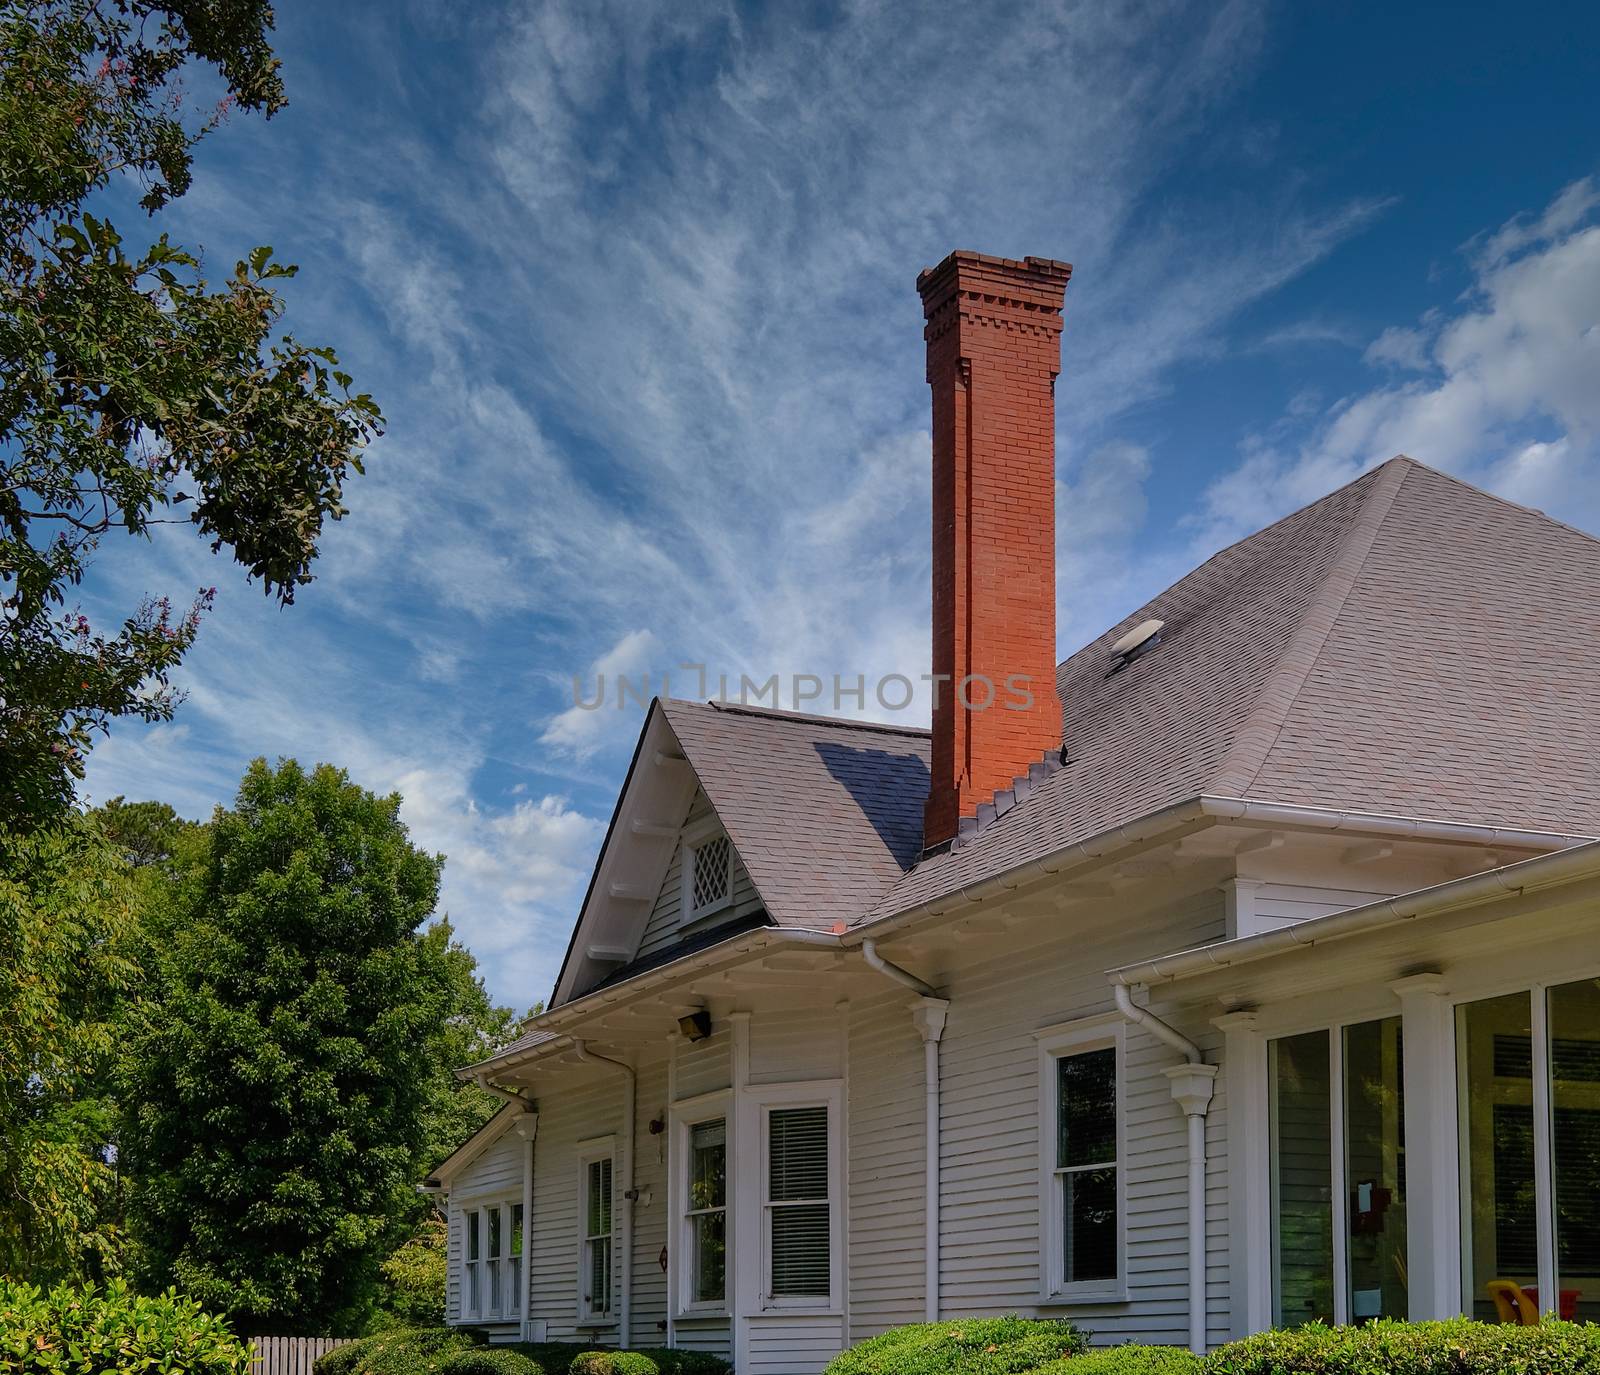 Tall Brick Chimney in Farmhouse in Rural area